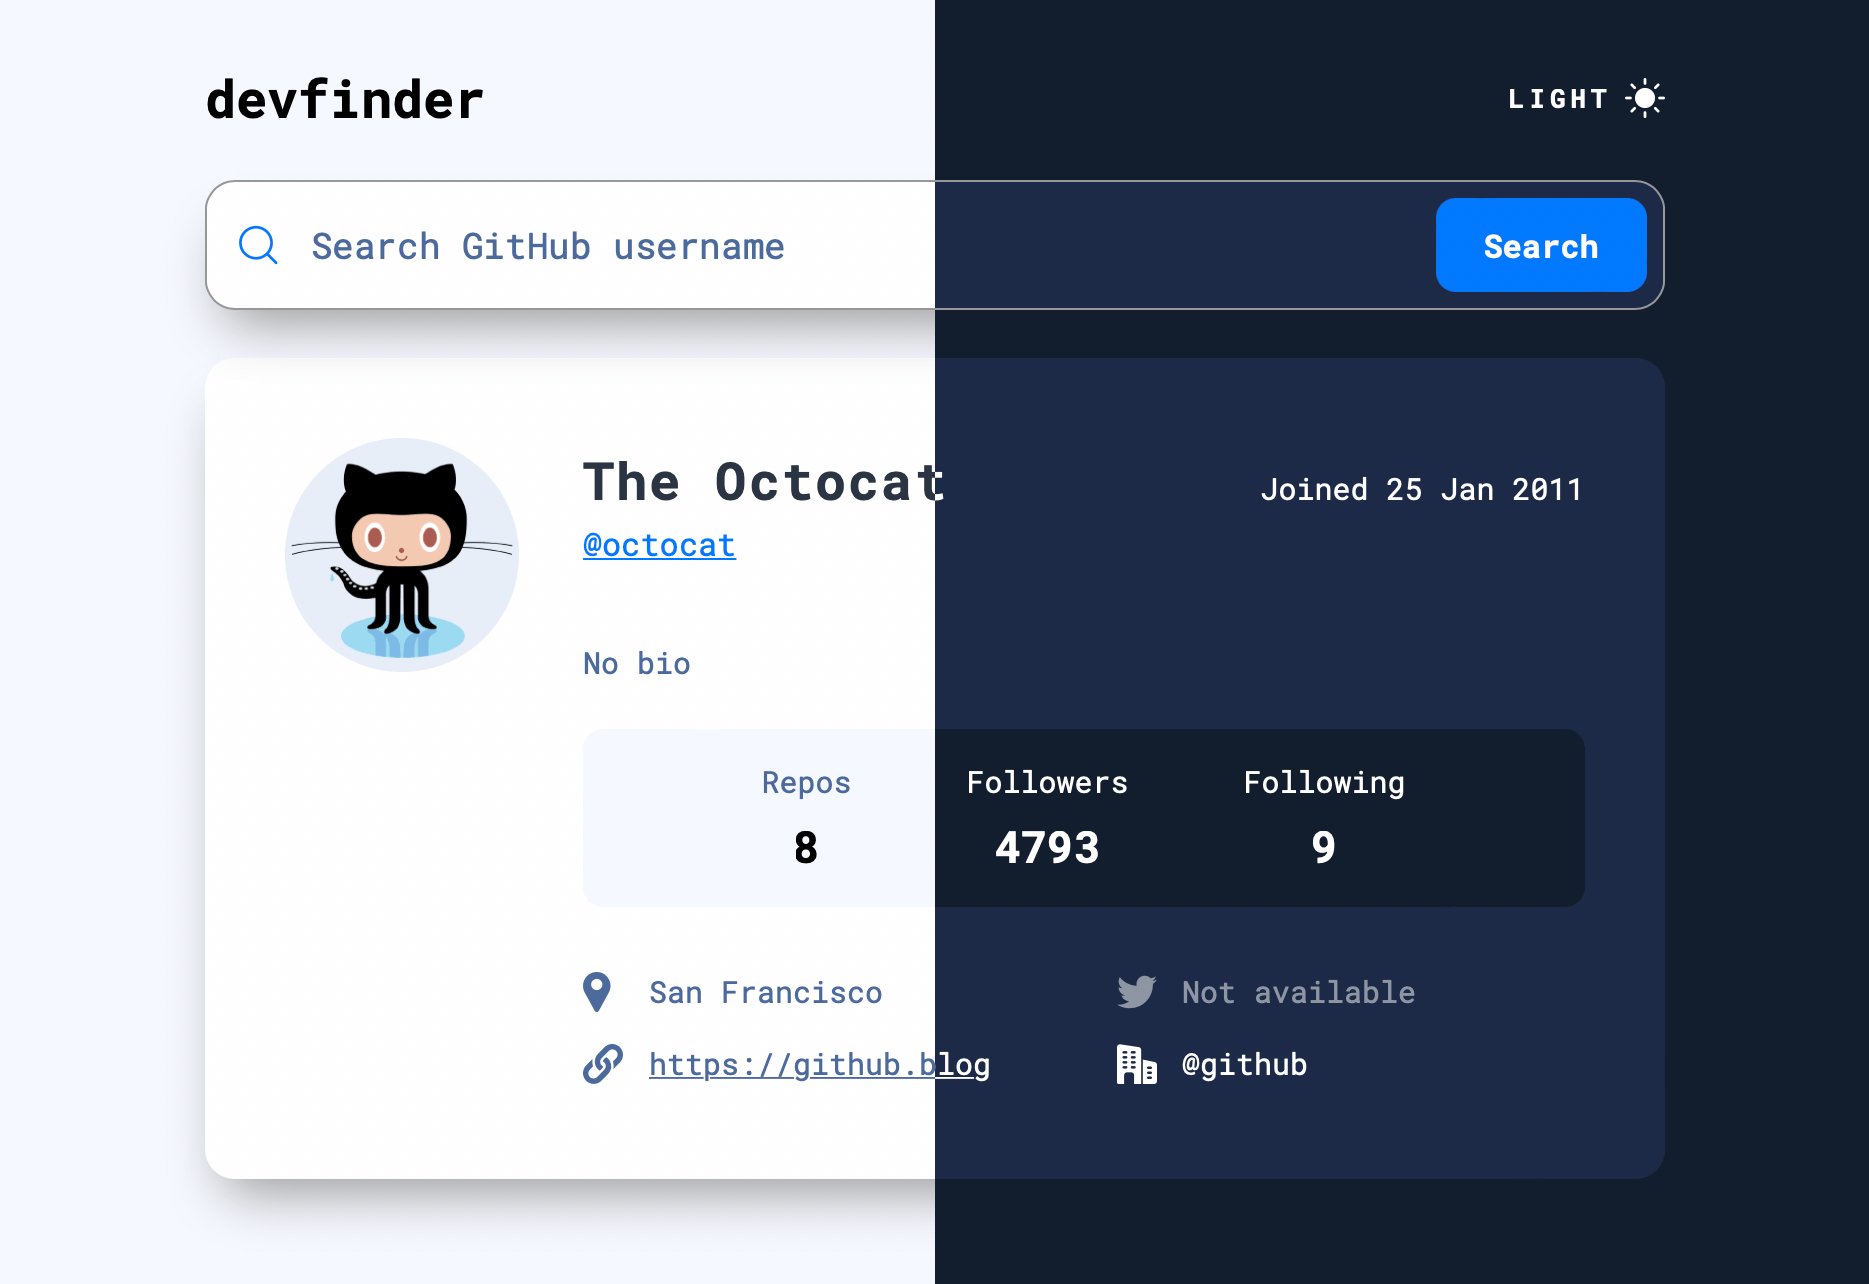 Screenshot from 'devfinder' app, showing light and dark mode side-by-side.